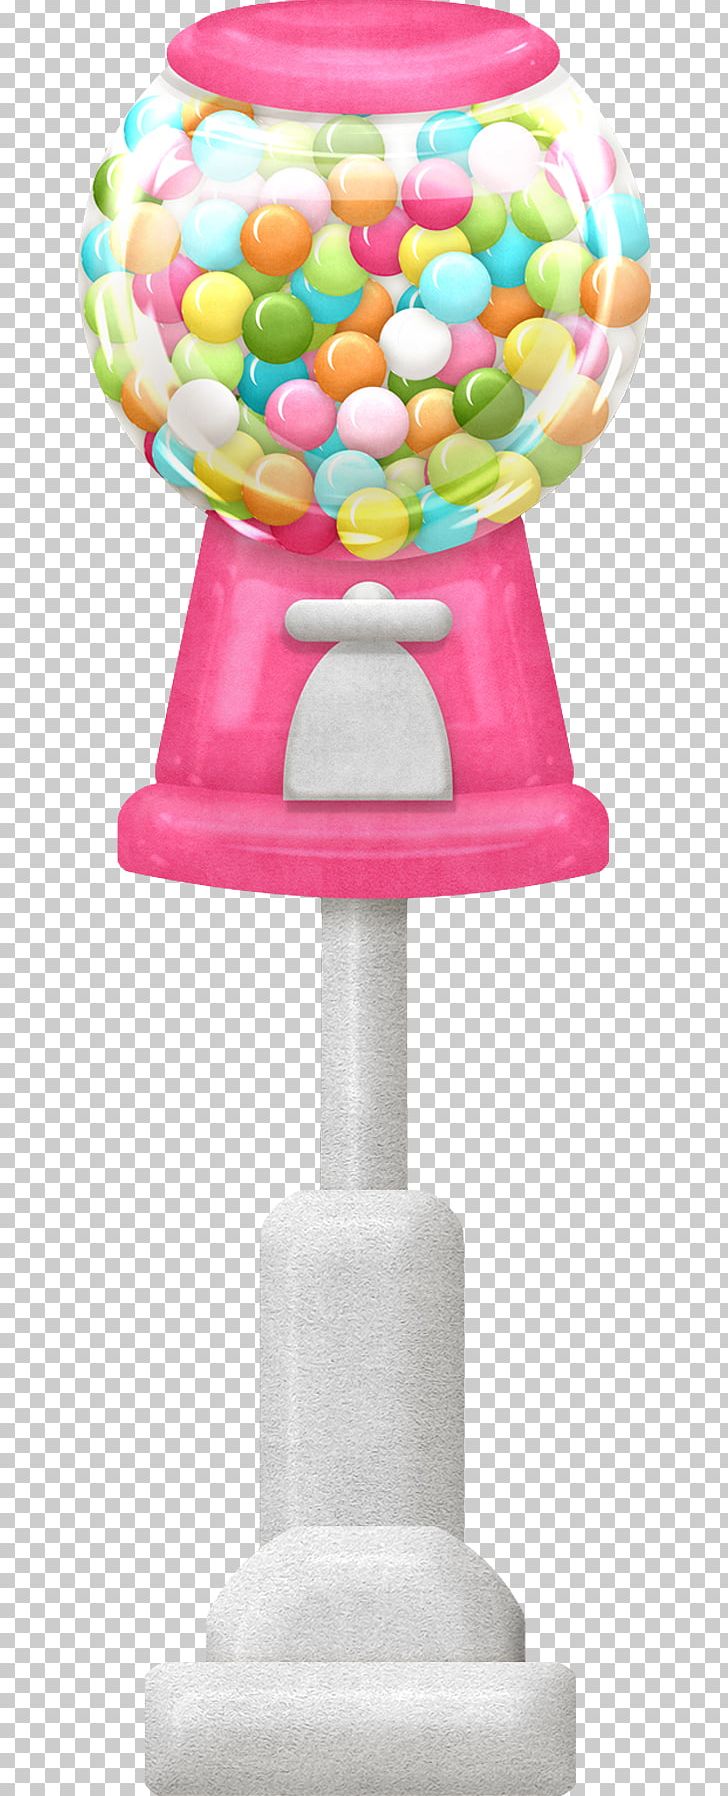 Chewing Gum Gumball Machine Candy Bubble Gum PNG, Clipart, Beans, Bubble Gum, Cake Stand, Candies, Candy Free PNG Download